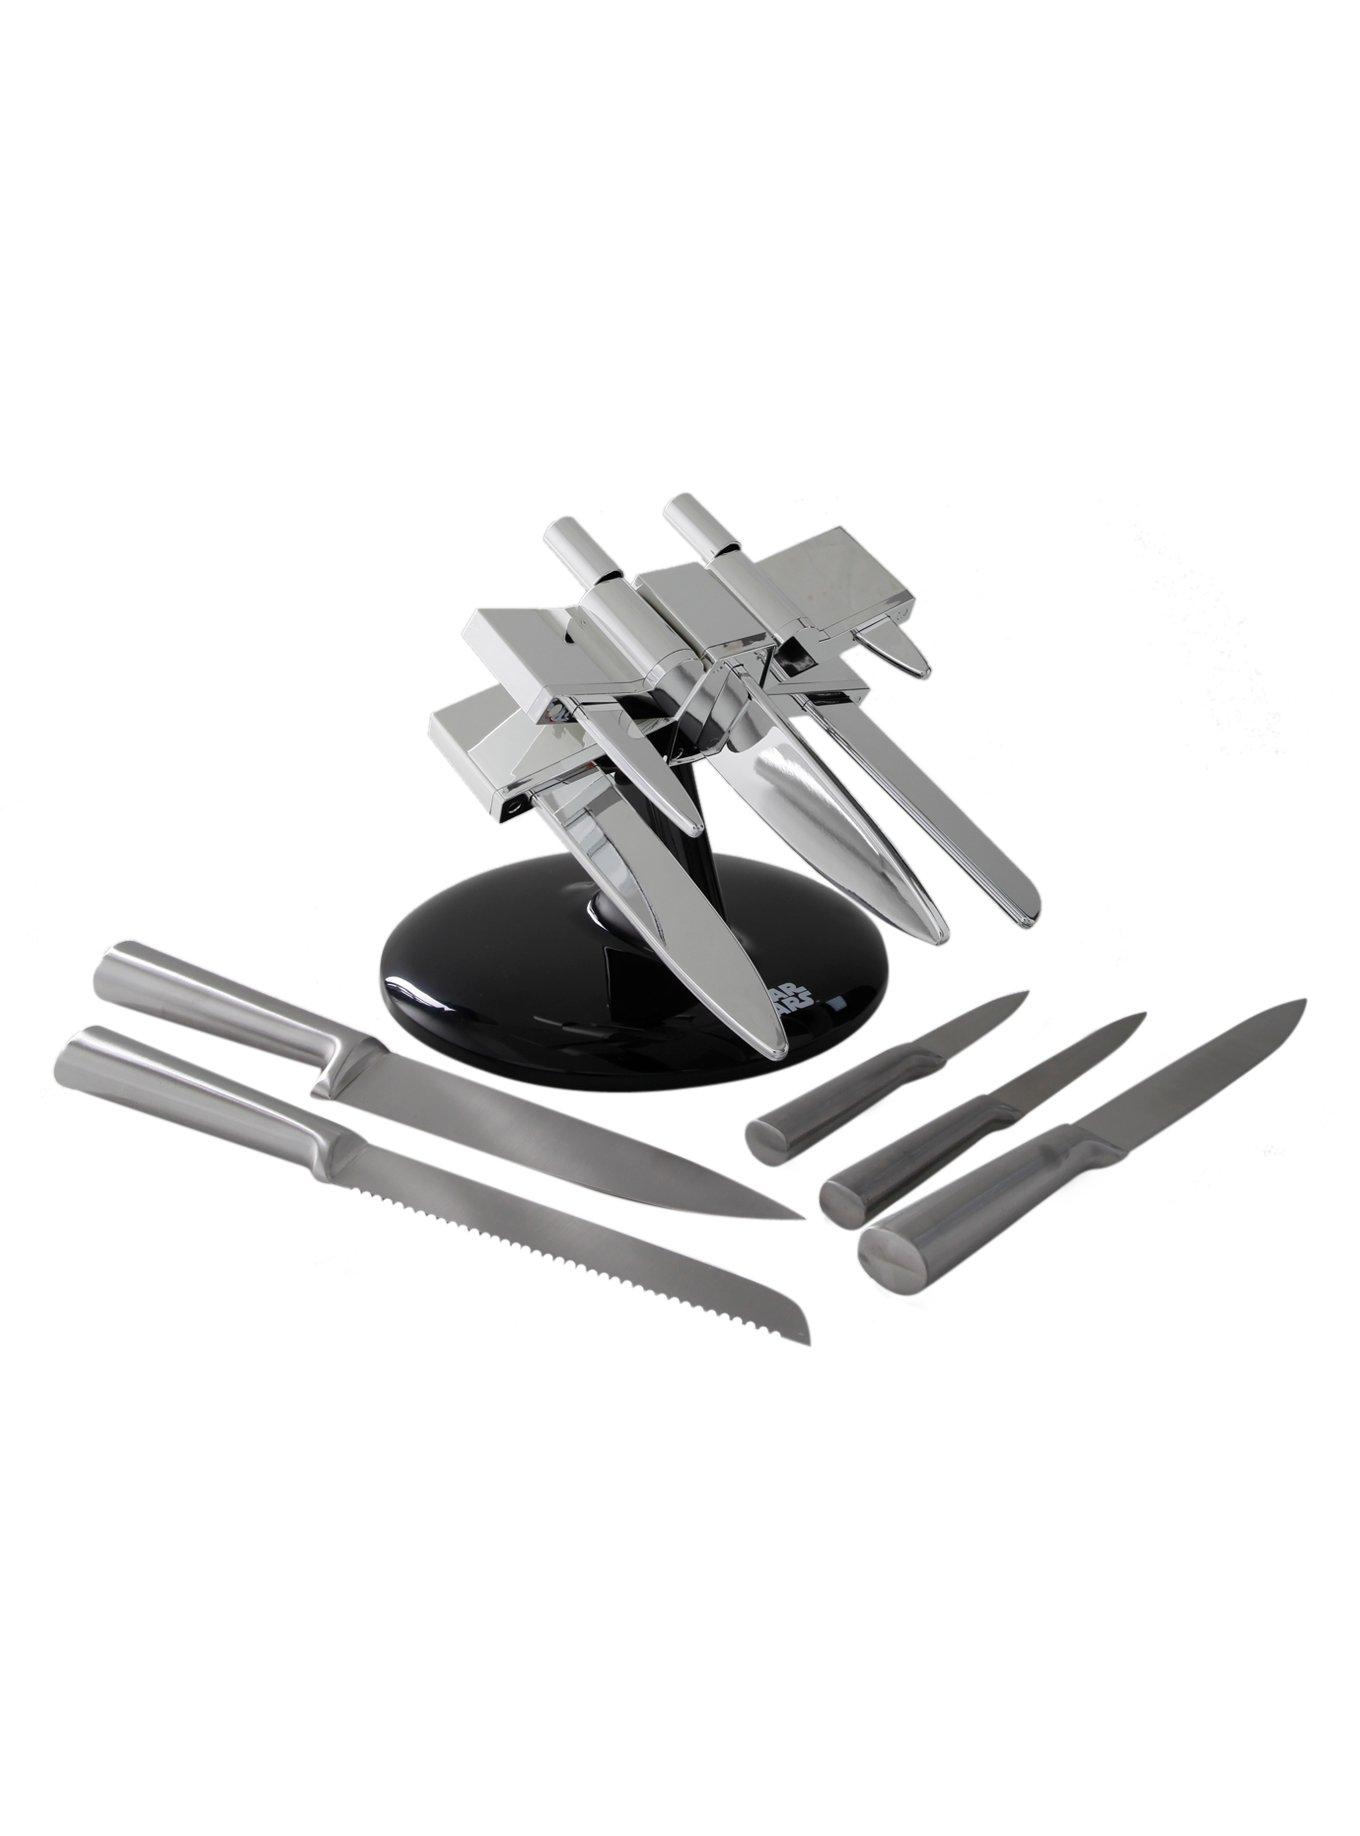 Epic Star Wars X-Wing Knife Set for All Cooking Warriors